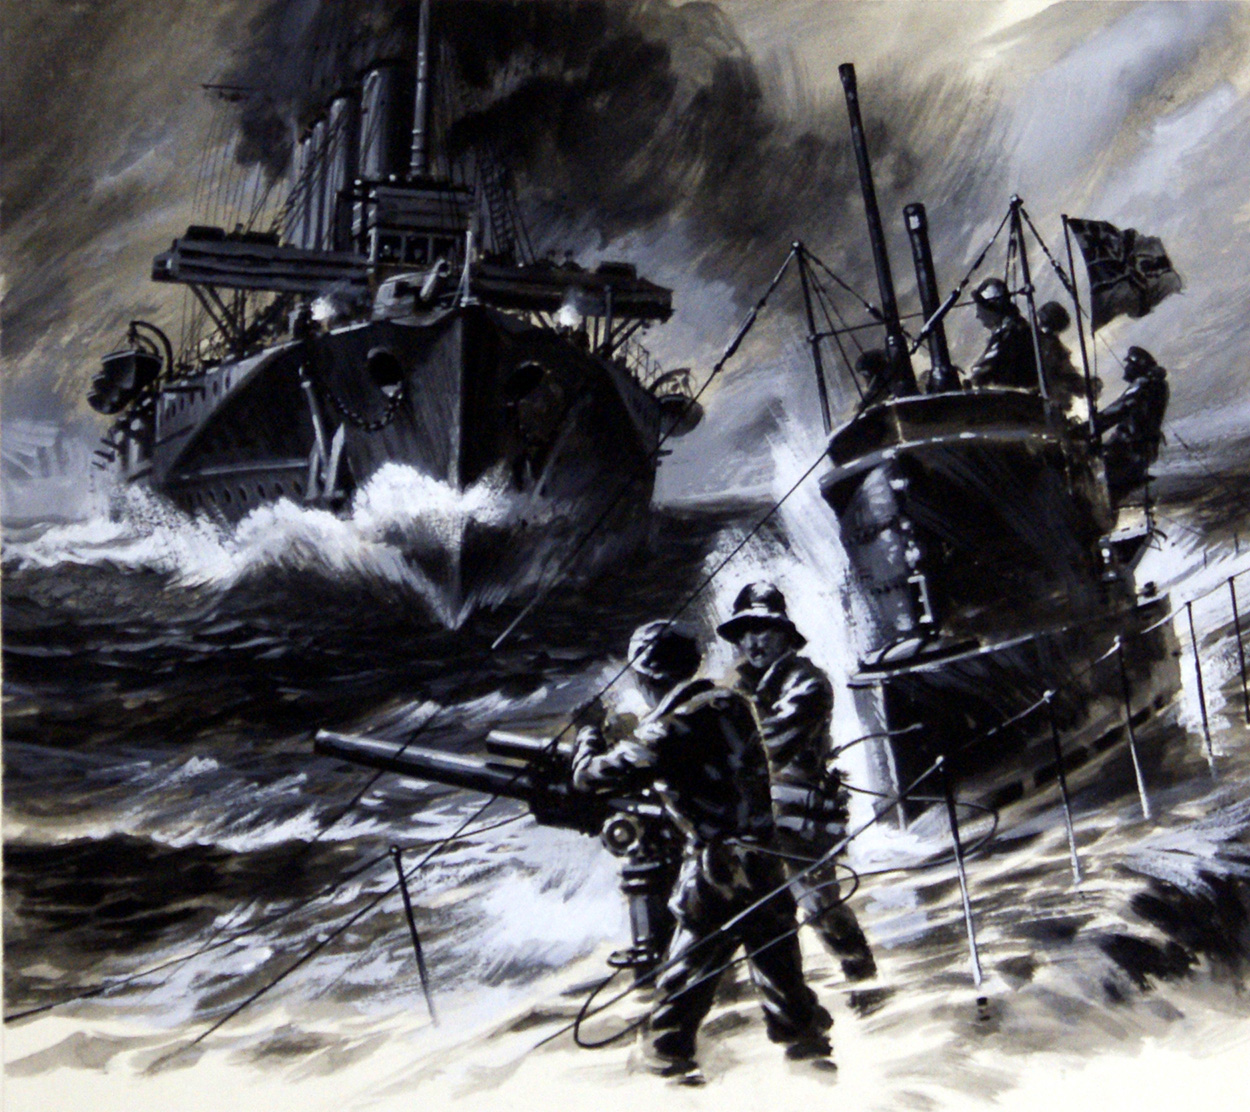 U-Boat Sunk - The End of U-15 (Original) art by Sea (Wilf Hardy) at The Illustration Art Gallery